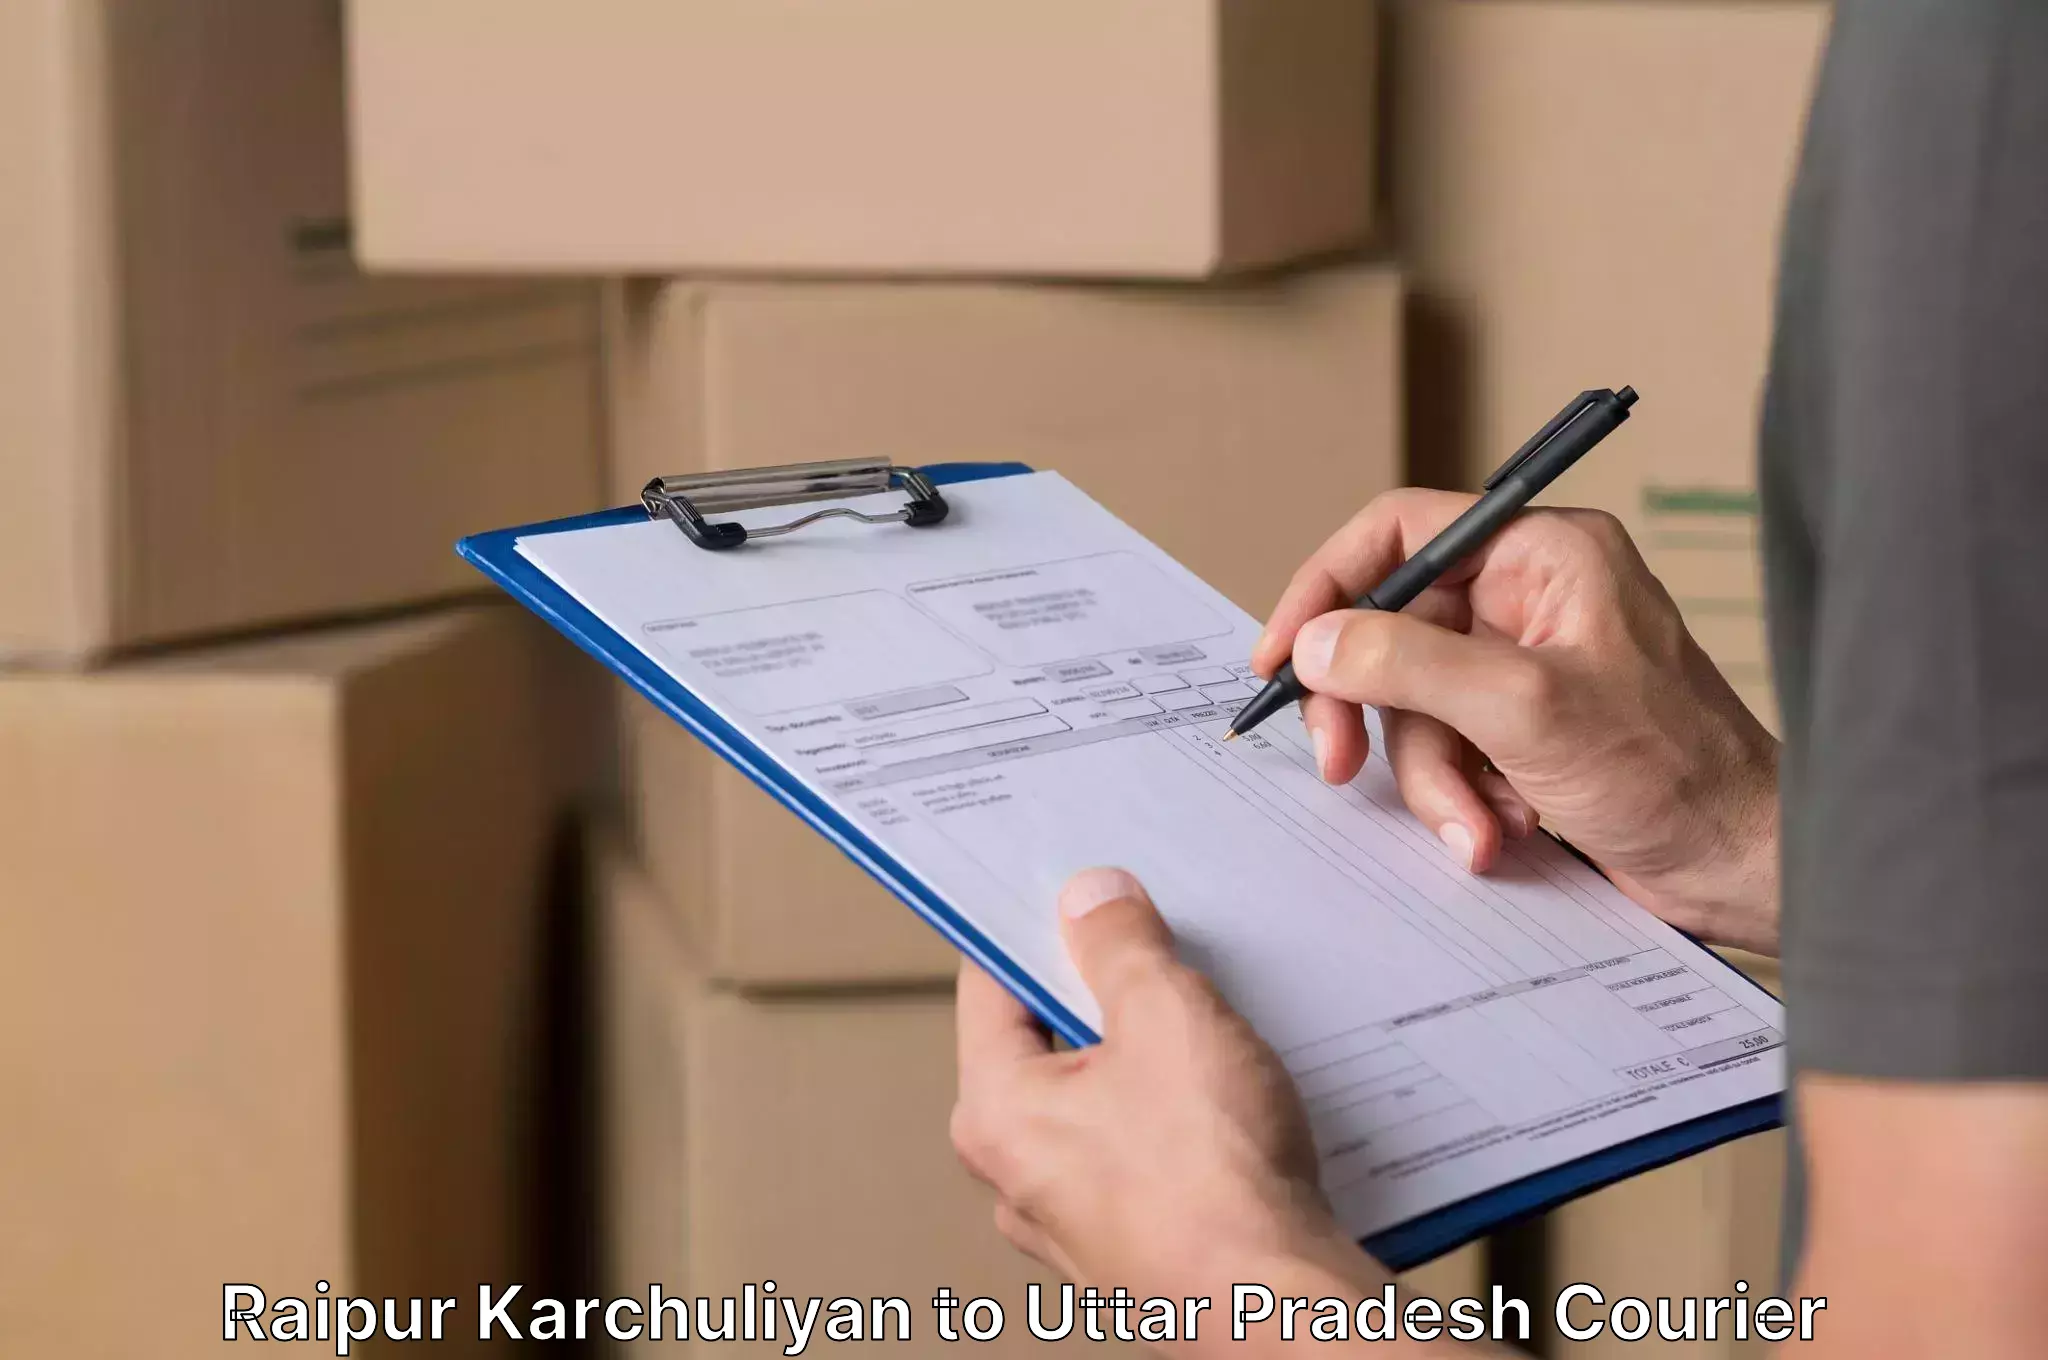 Furniture transport specialists Raipur Karchuliyan to Sultanpur